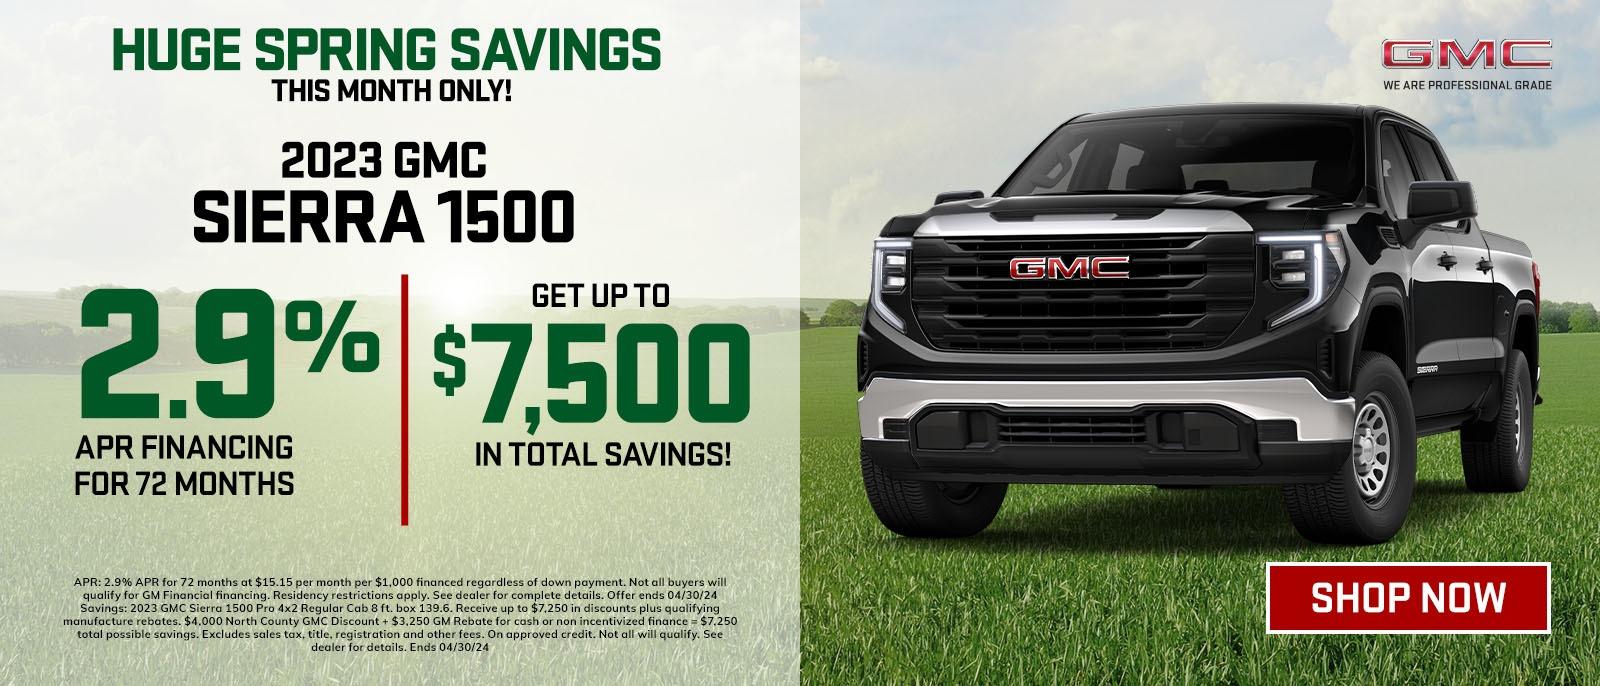 HUGE SPRING SAVINGS 
THIS MONTH ONLY
2023 GMC SIERRA 1500
2.9% APR FINANCING FOR 72 MONTHS
GET UPTO $7,500 IN TOTAL SAVING